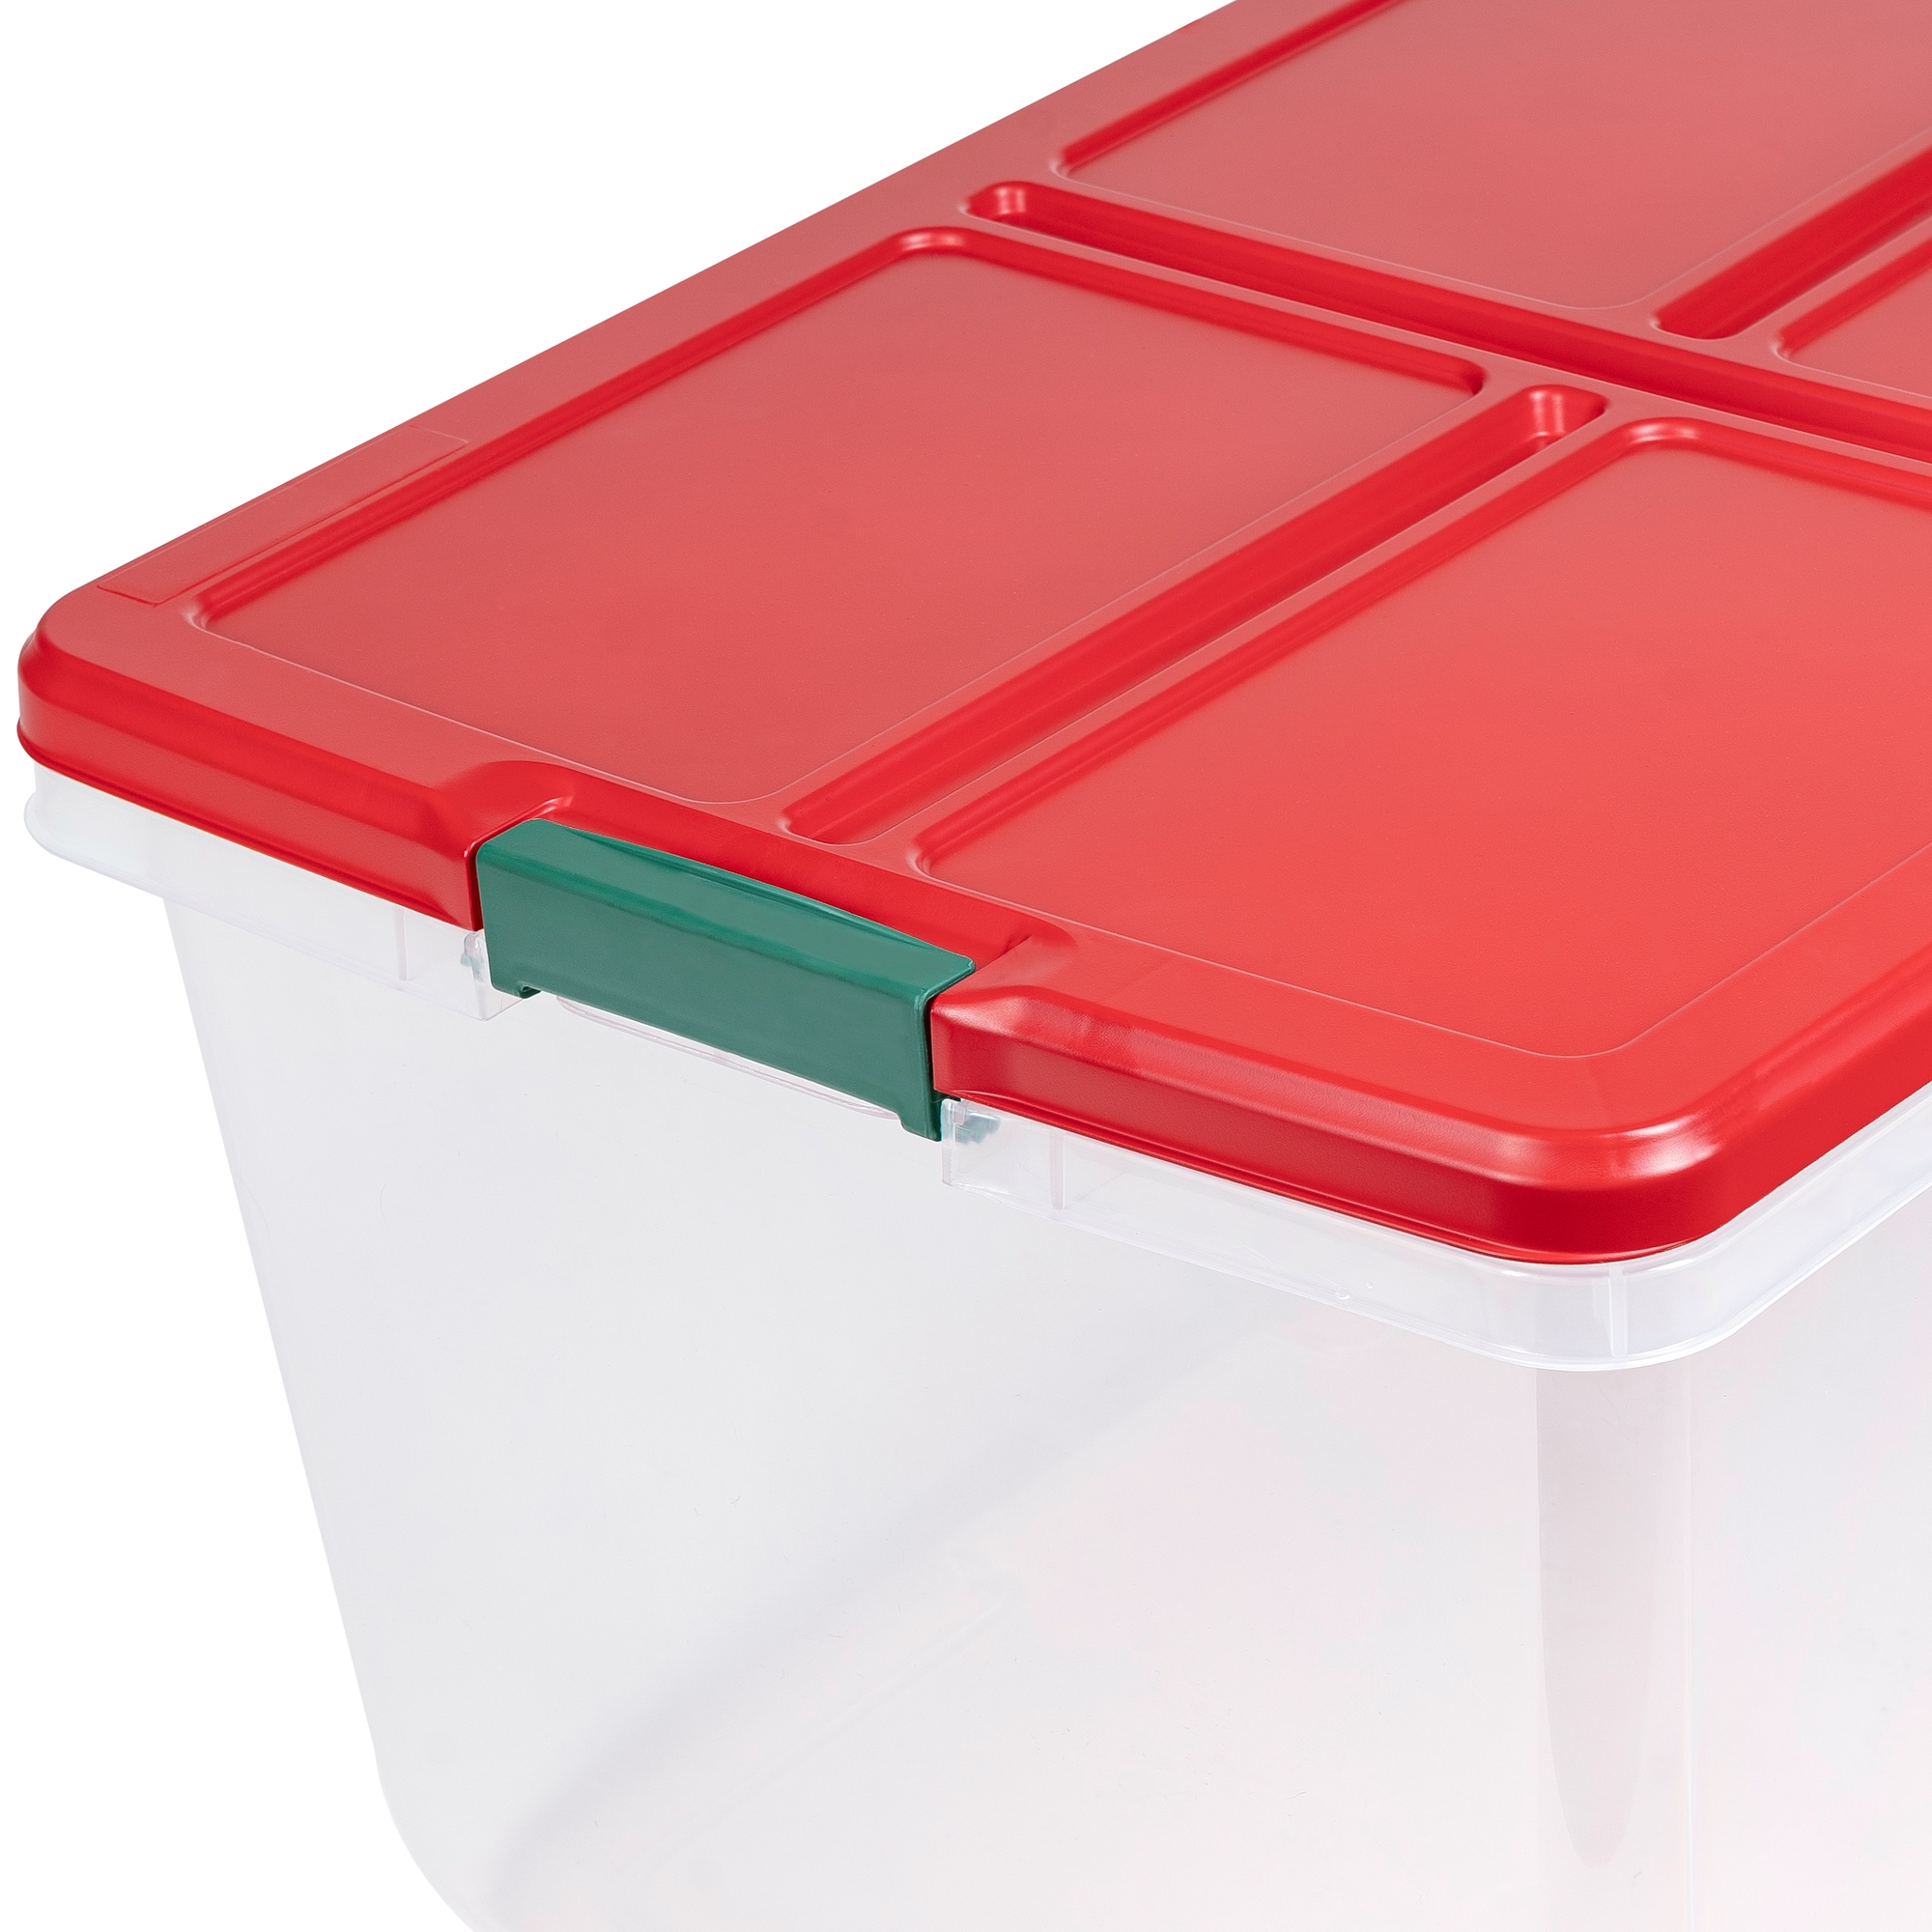 Hefty 113 qt Clear Plastic Holiday Latched Storage Bin, Red Lid